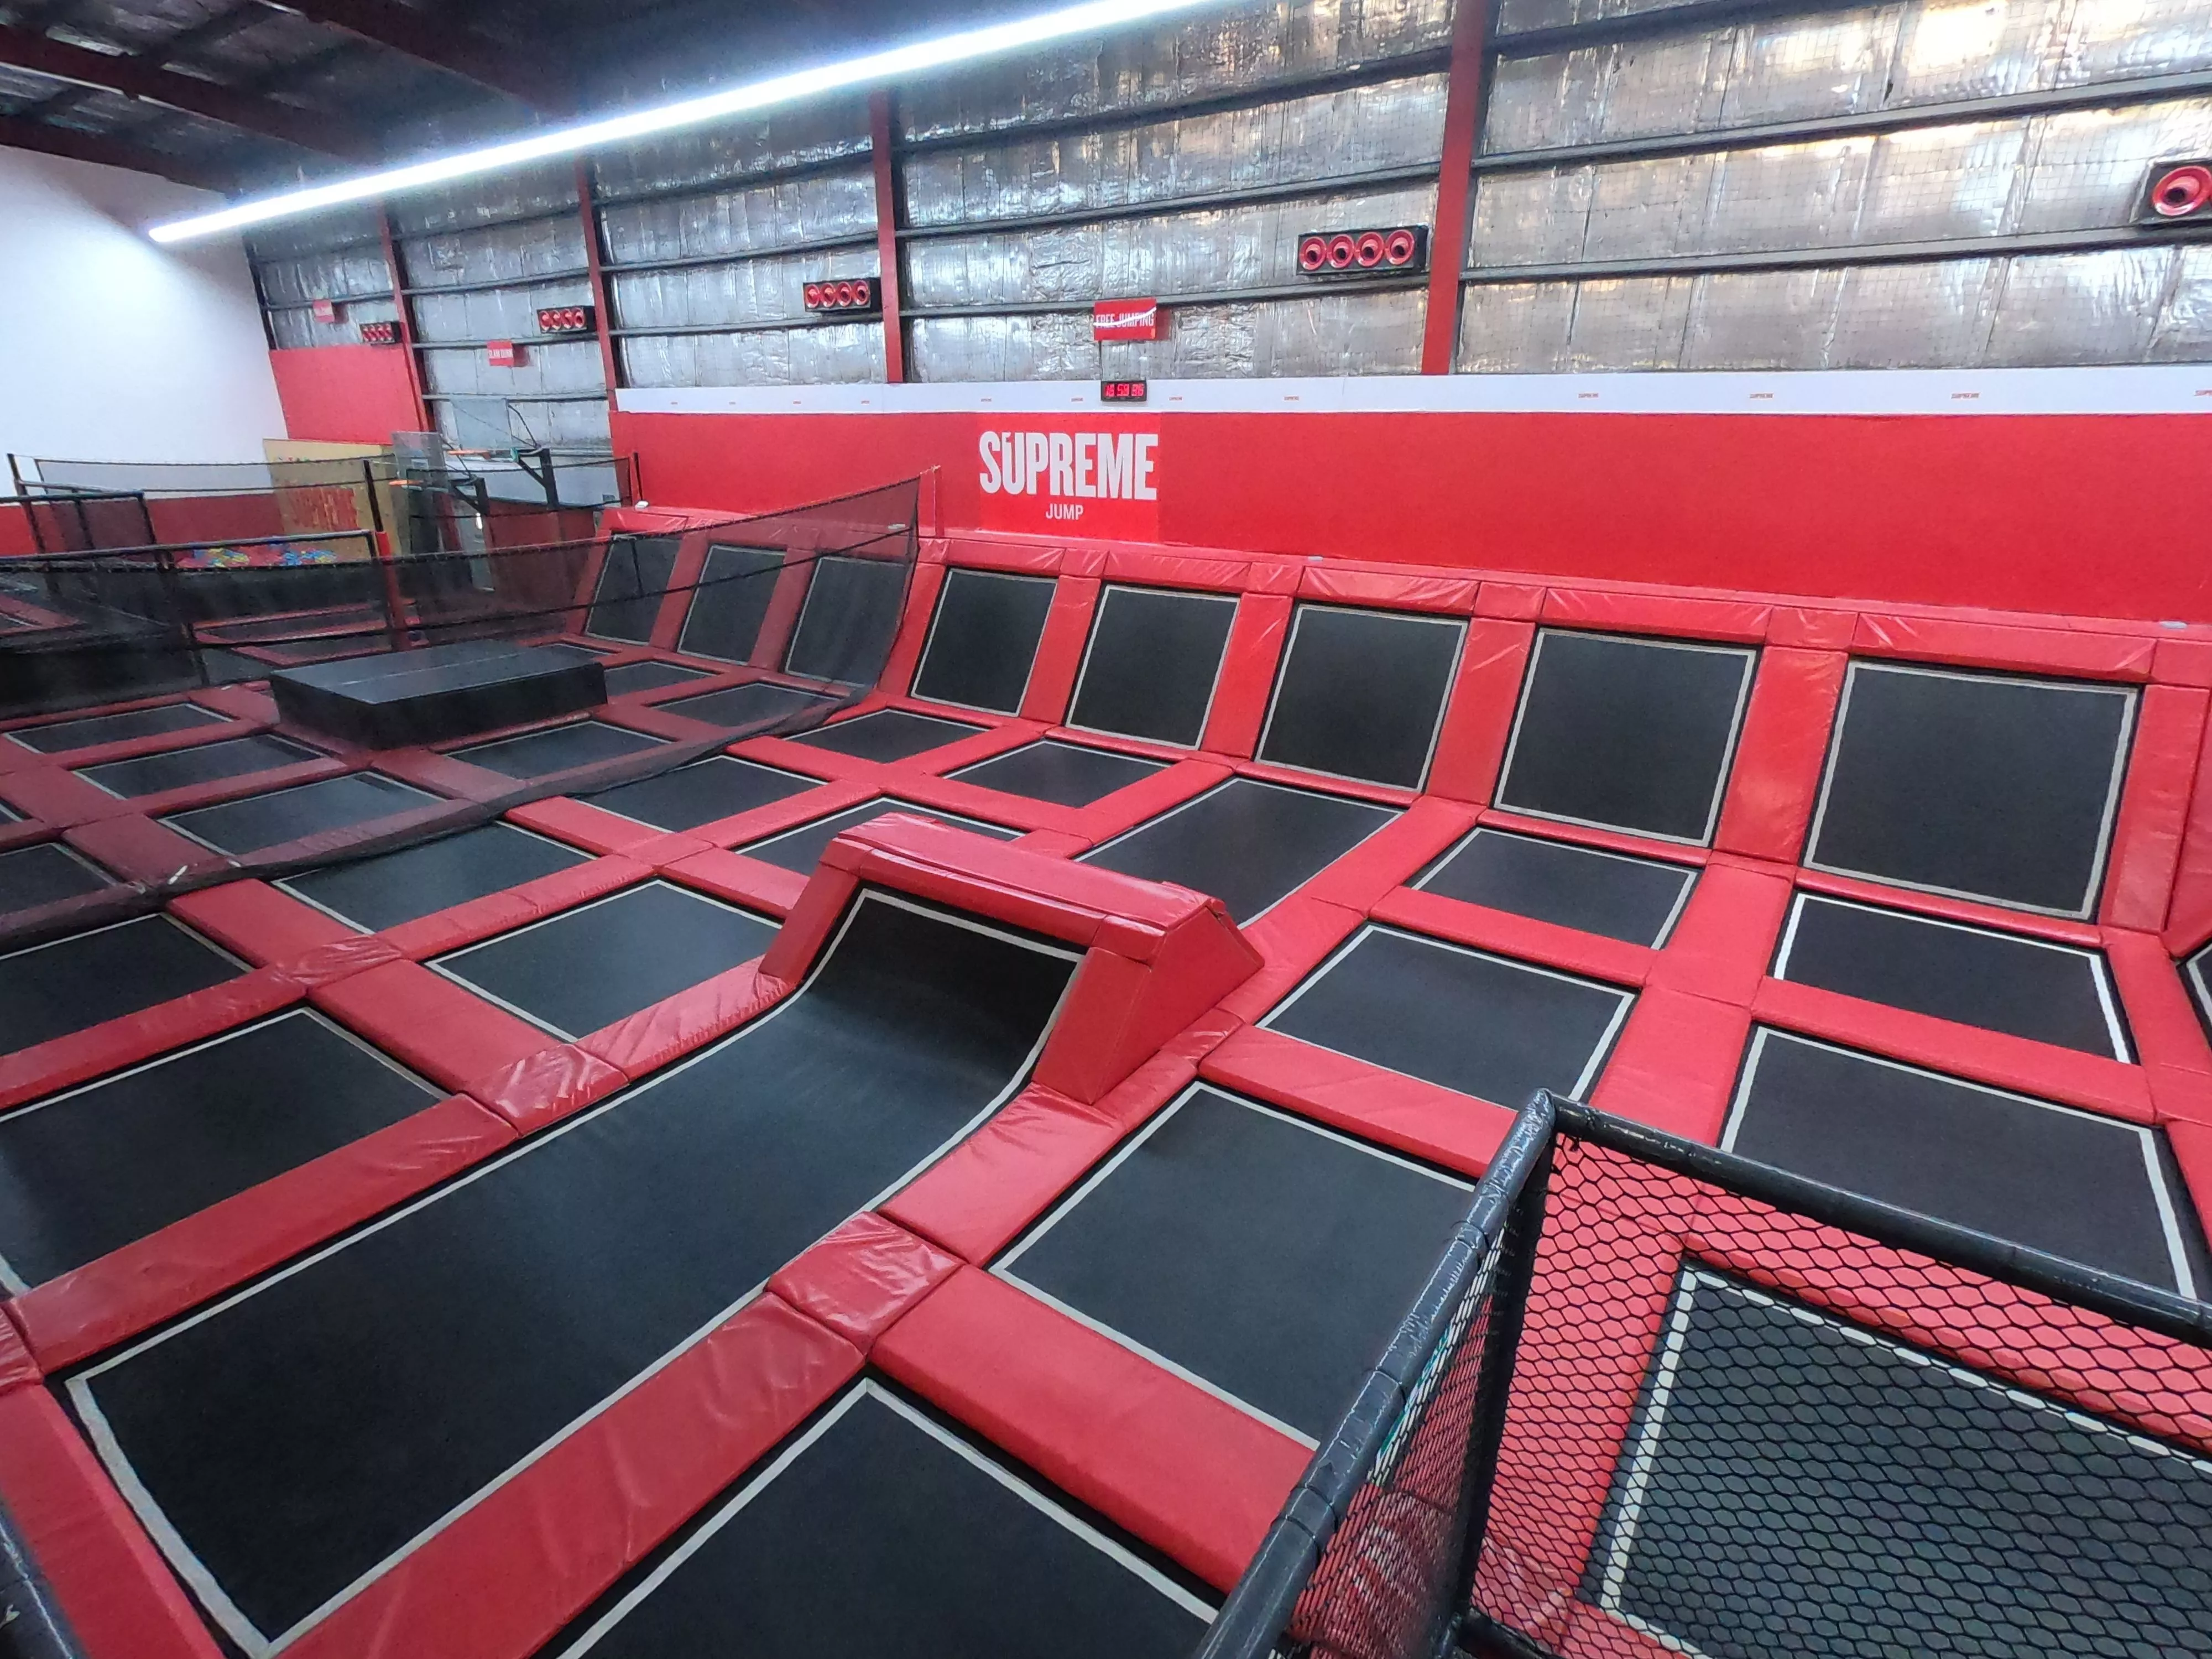 Supreme Trampoline Park in India, Central Asia | Trampolining - Rated 4